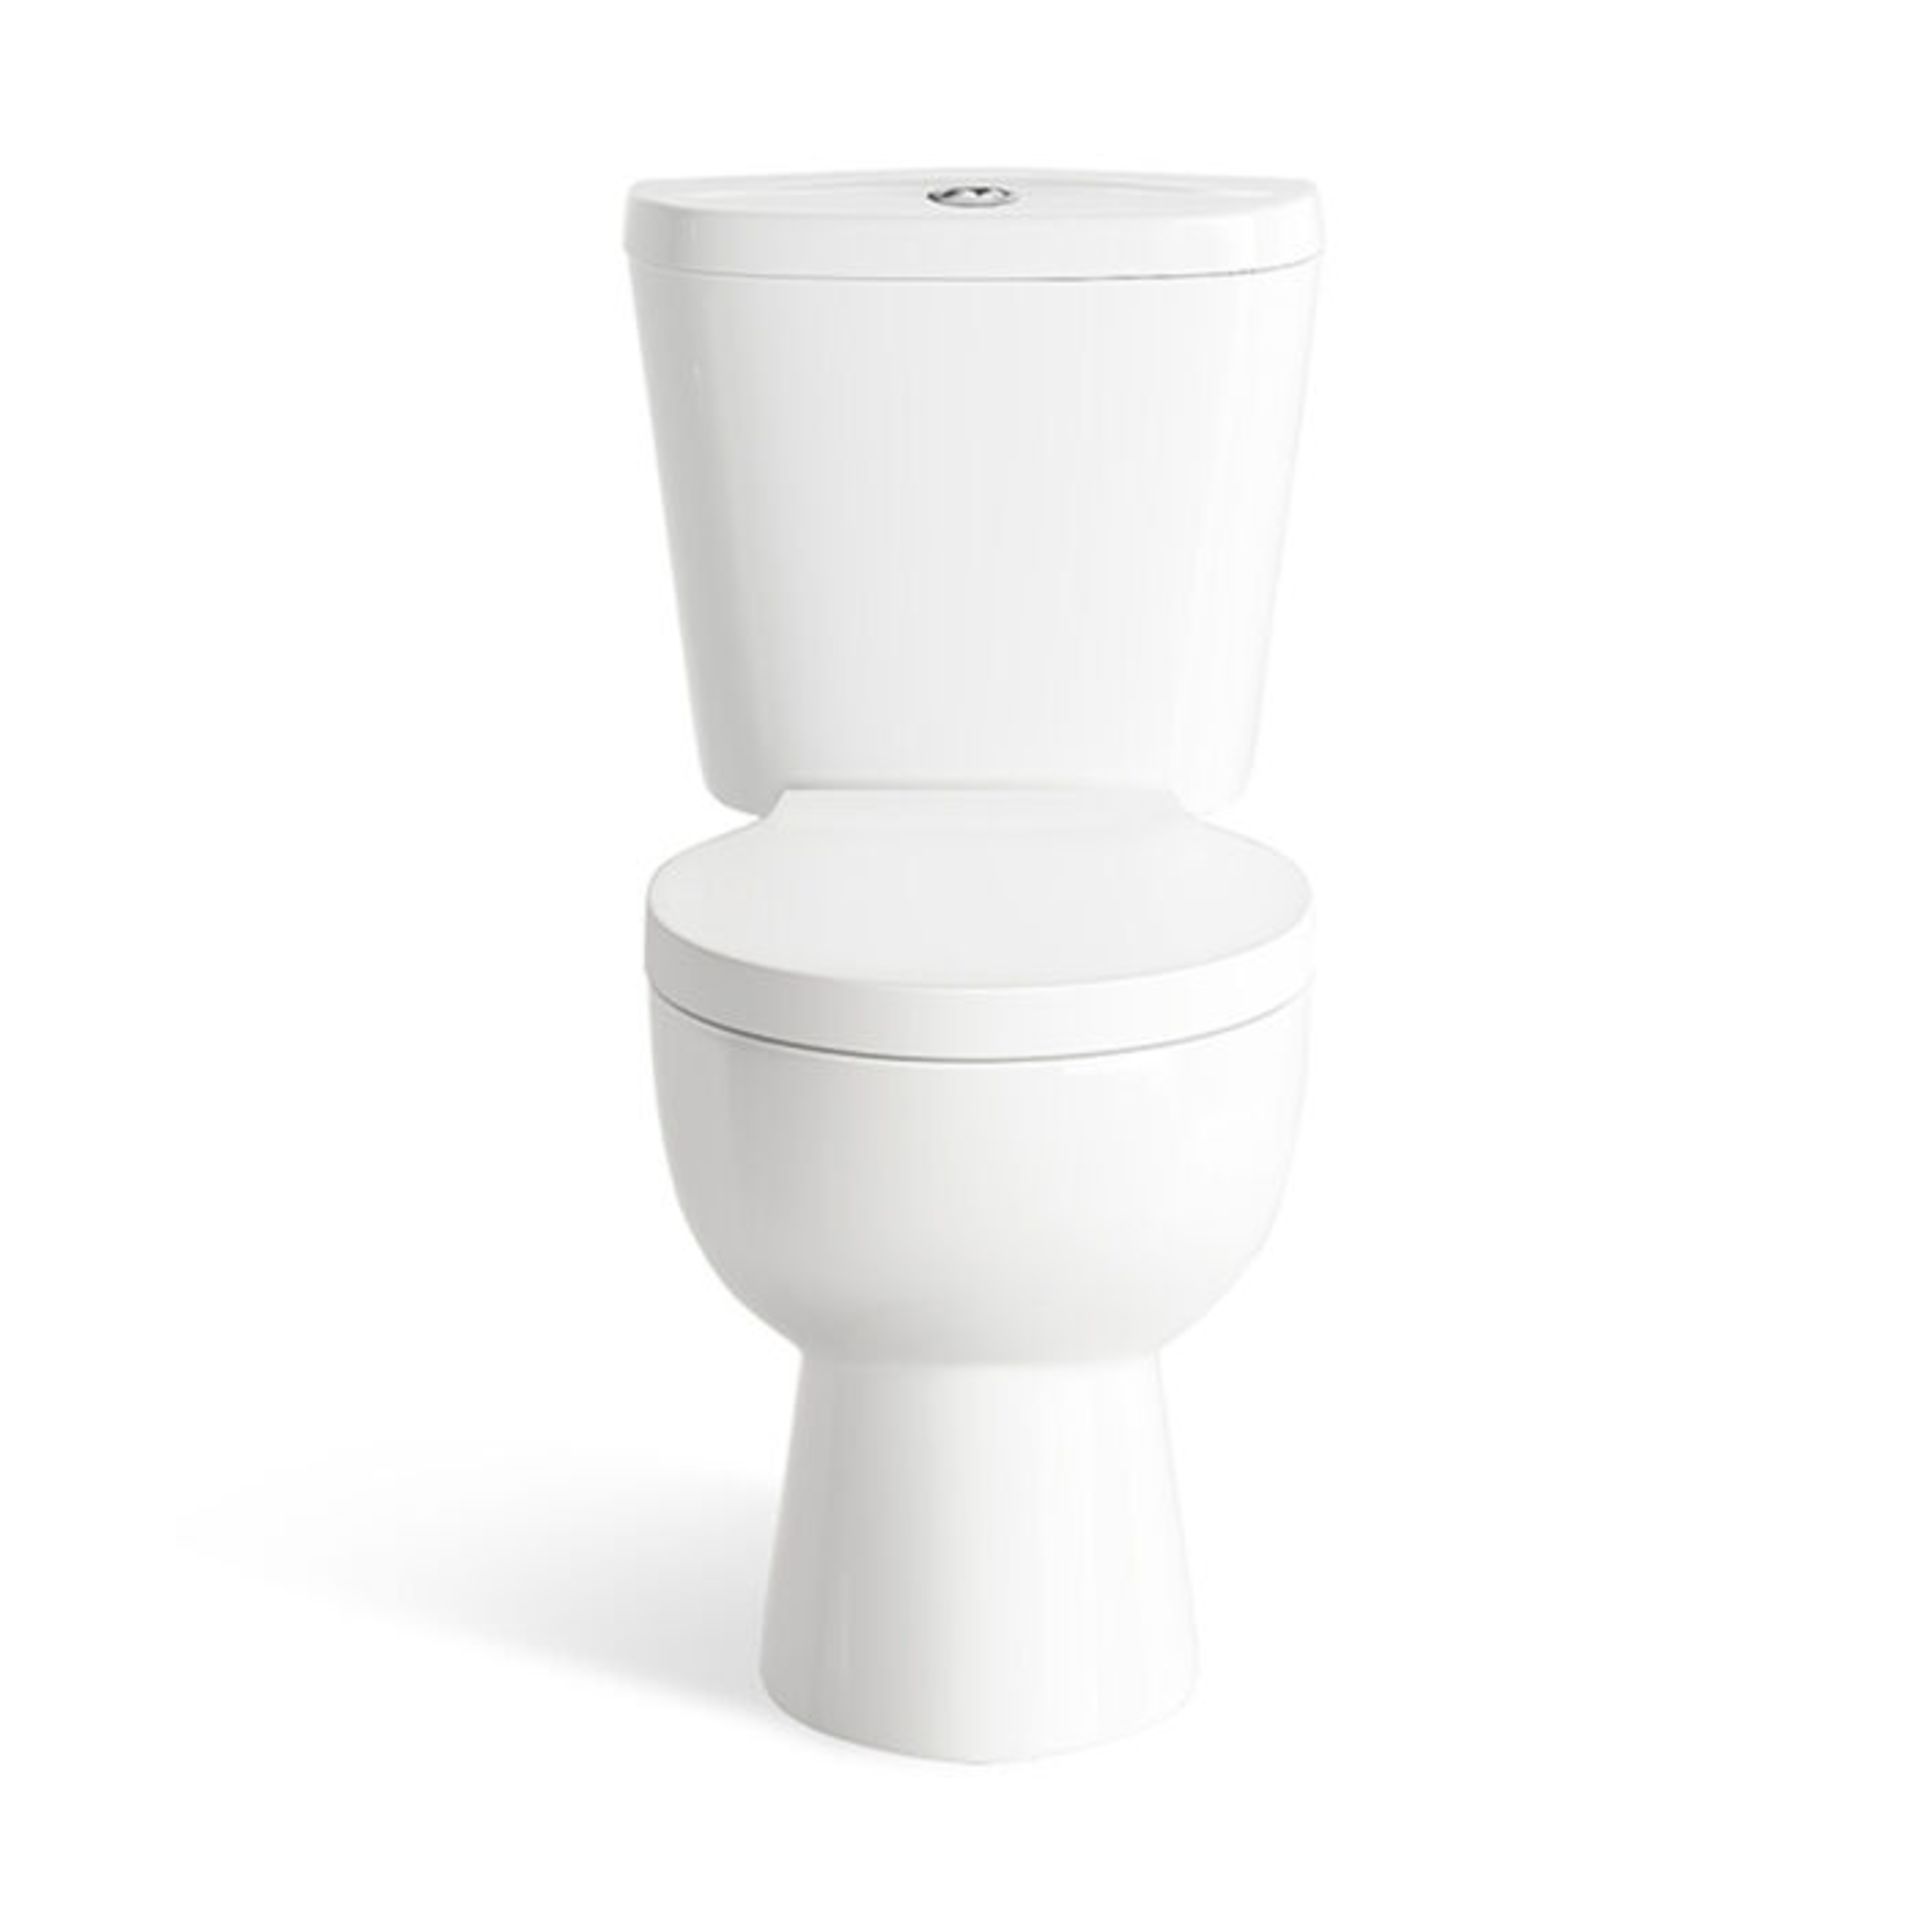 (MQ145) Quartz Close Coupled Toilet. We love this because it is simply great value! Made from ... - Image 2 of 2